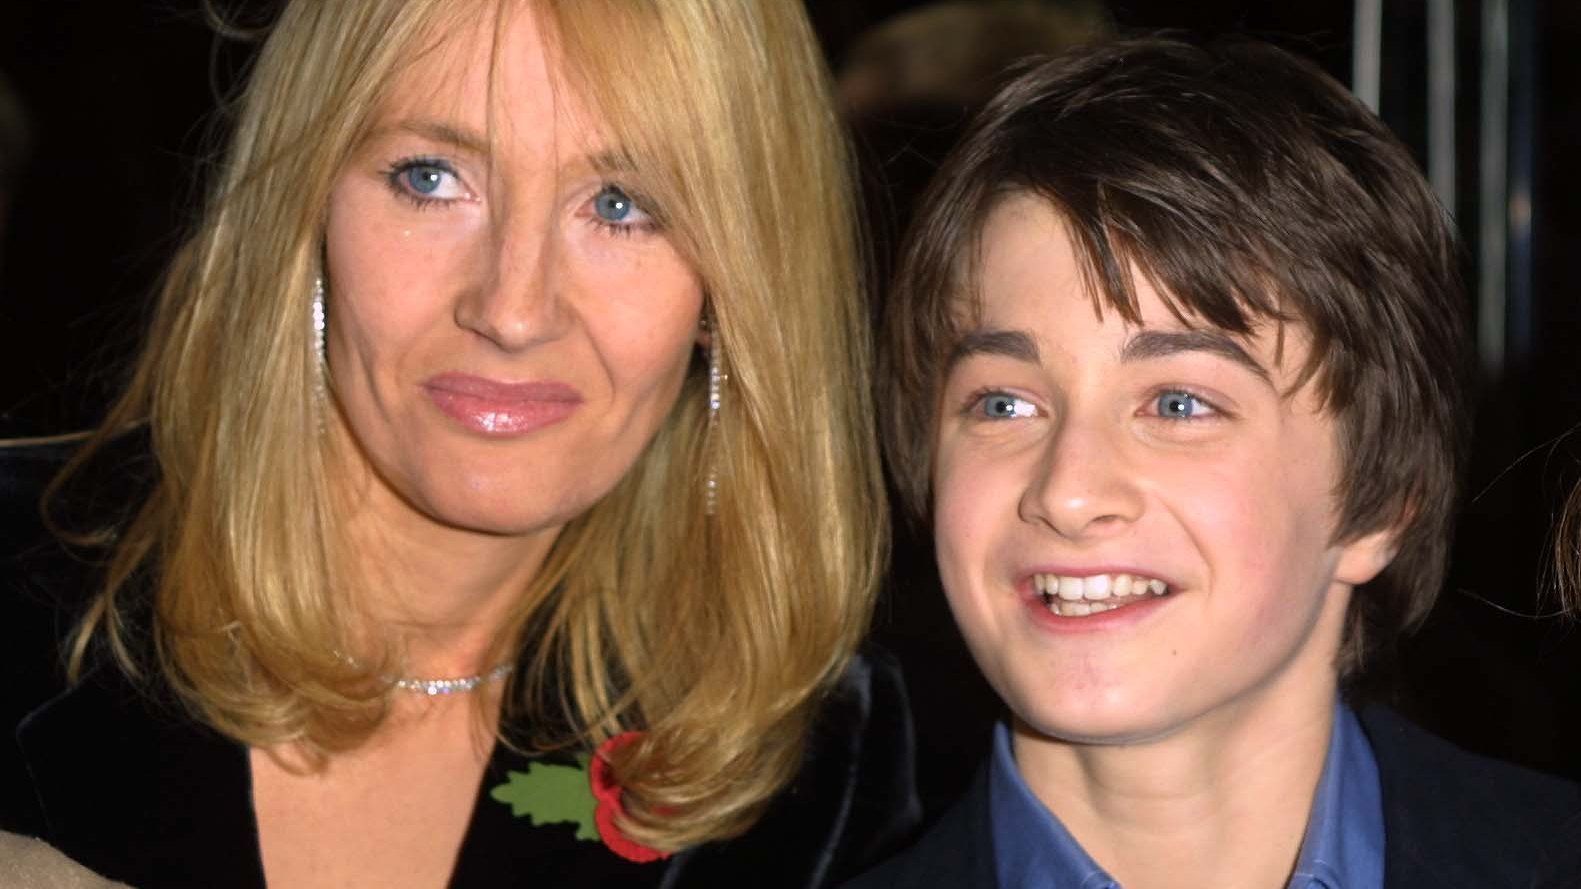 Rowling and Radcliffe, then aged 11, attend the world premiere of Harry Potter and The Philosopher’s Stone in London